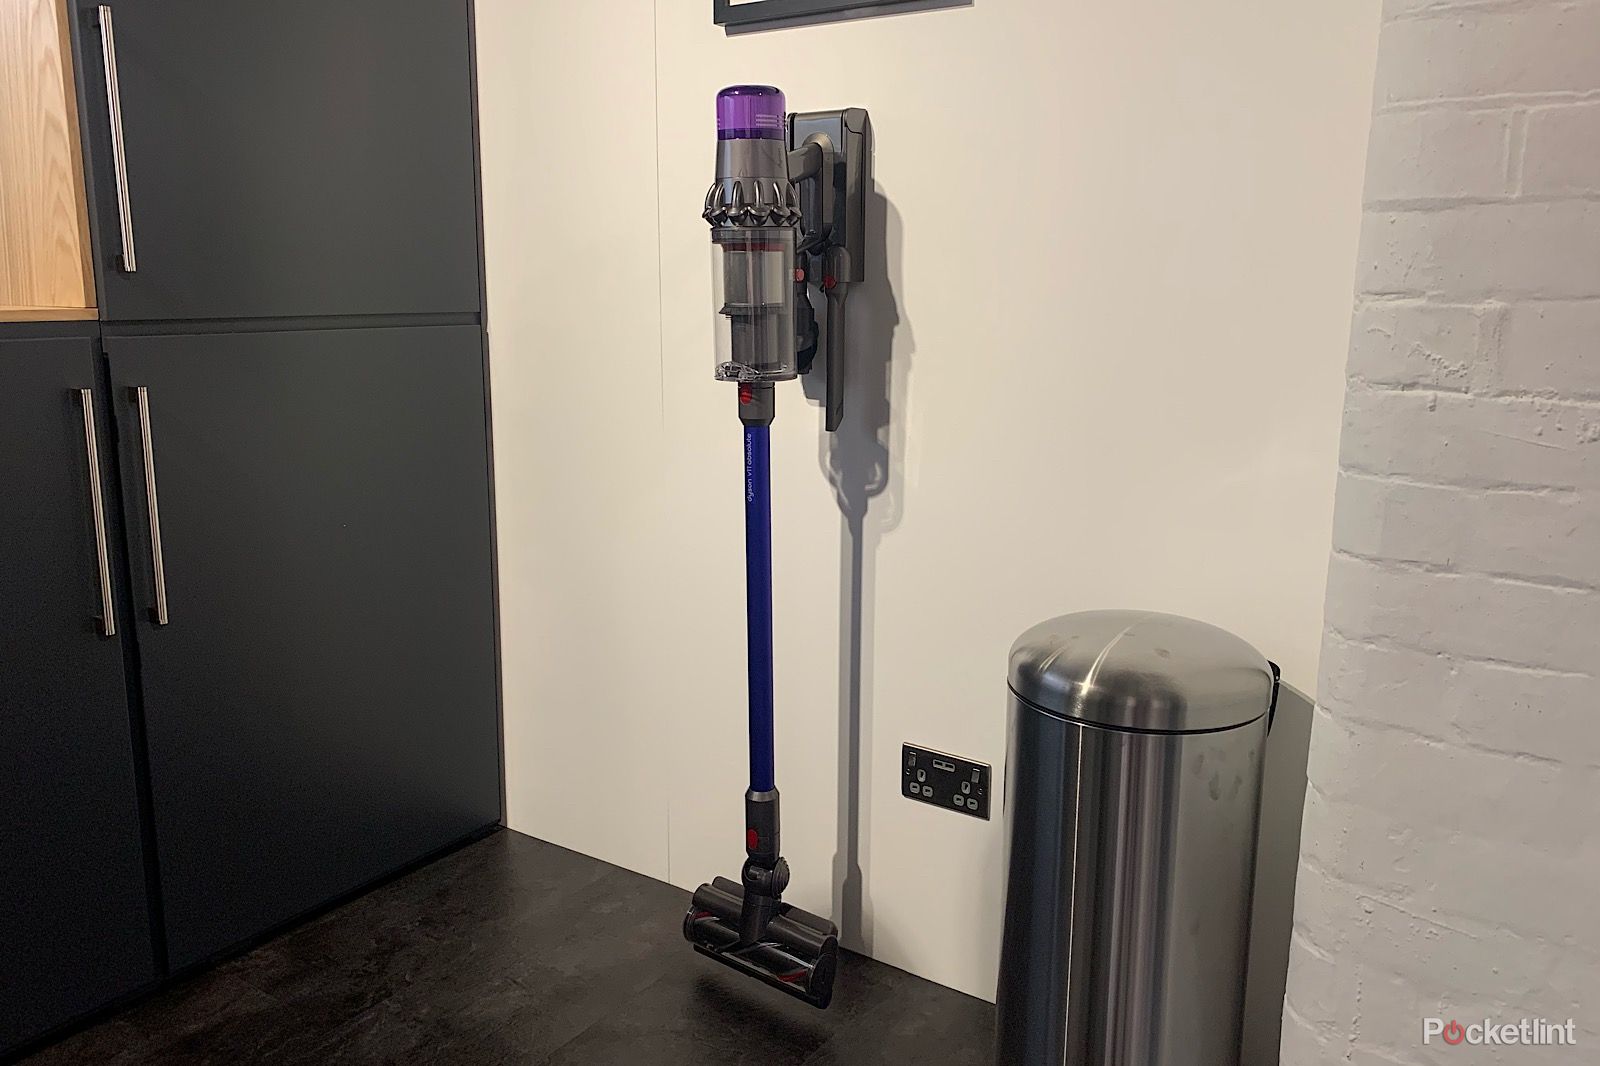 Dysons latest V11 cordless vacuum cleaner uses AI to clean image 1